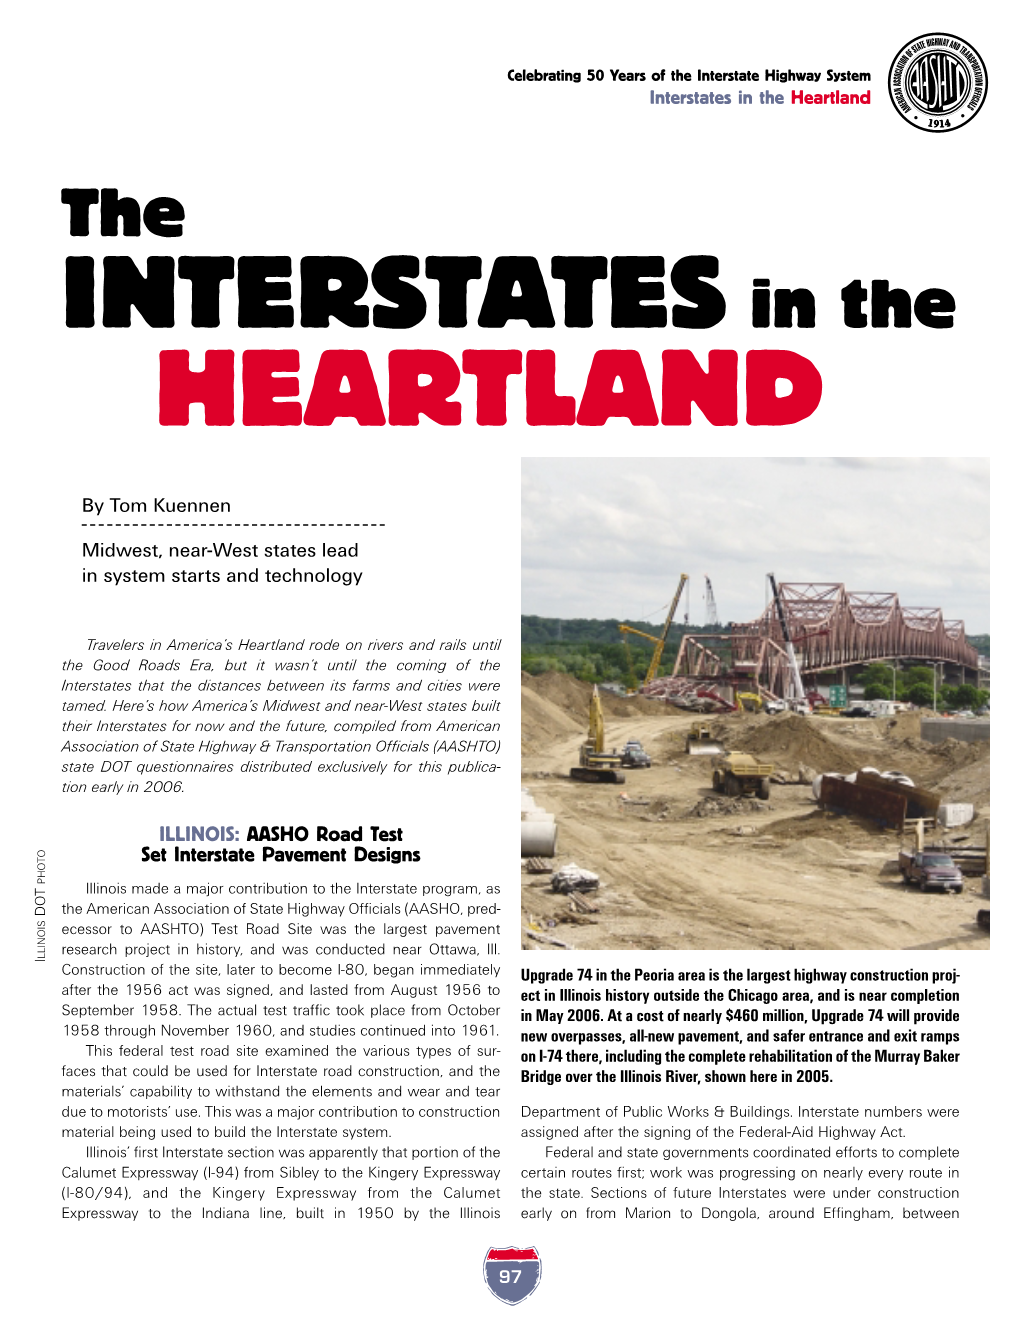 Interstates in the Heartland